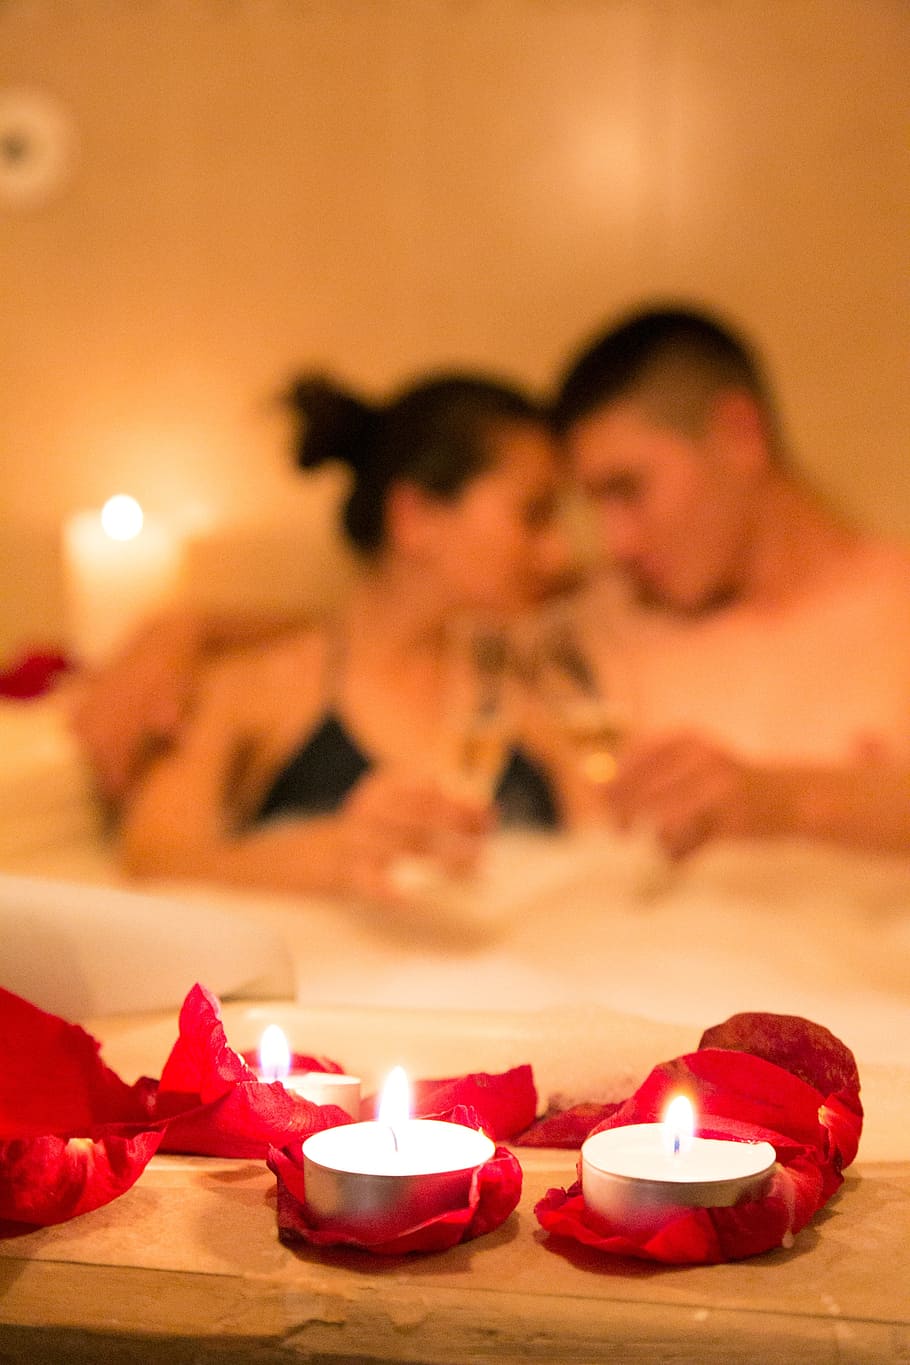 tilt-shift lens photo, three, lit-up tealight candles, brown, surface, candle, relaxation, romantic, spa, massage